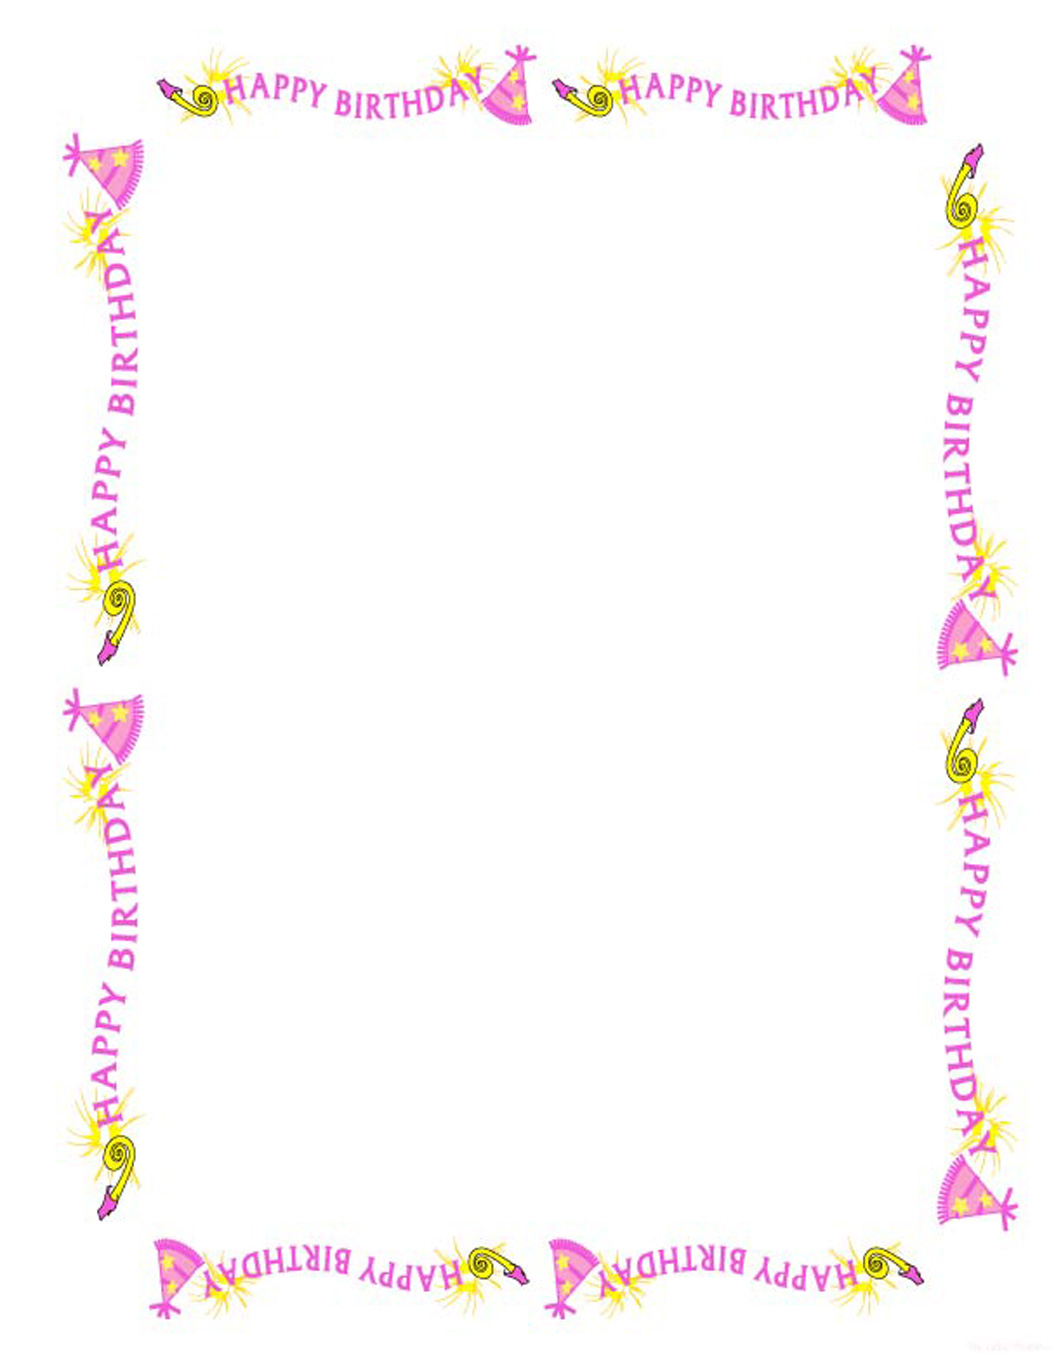 clipart birthday borders and frames - photo #11